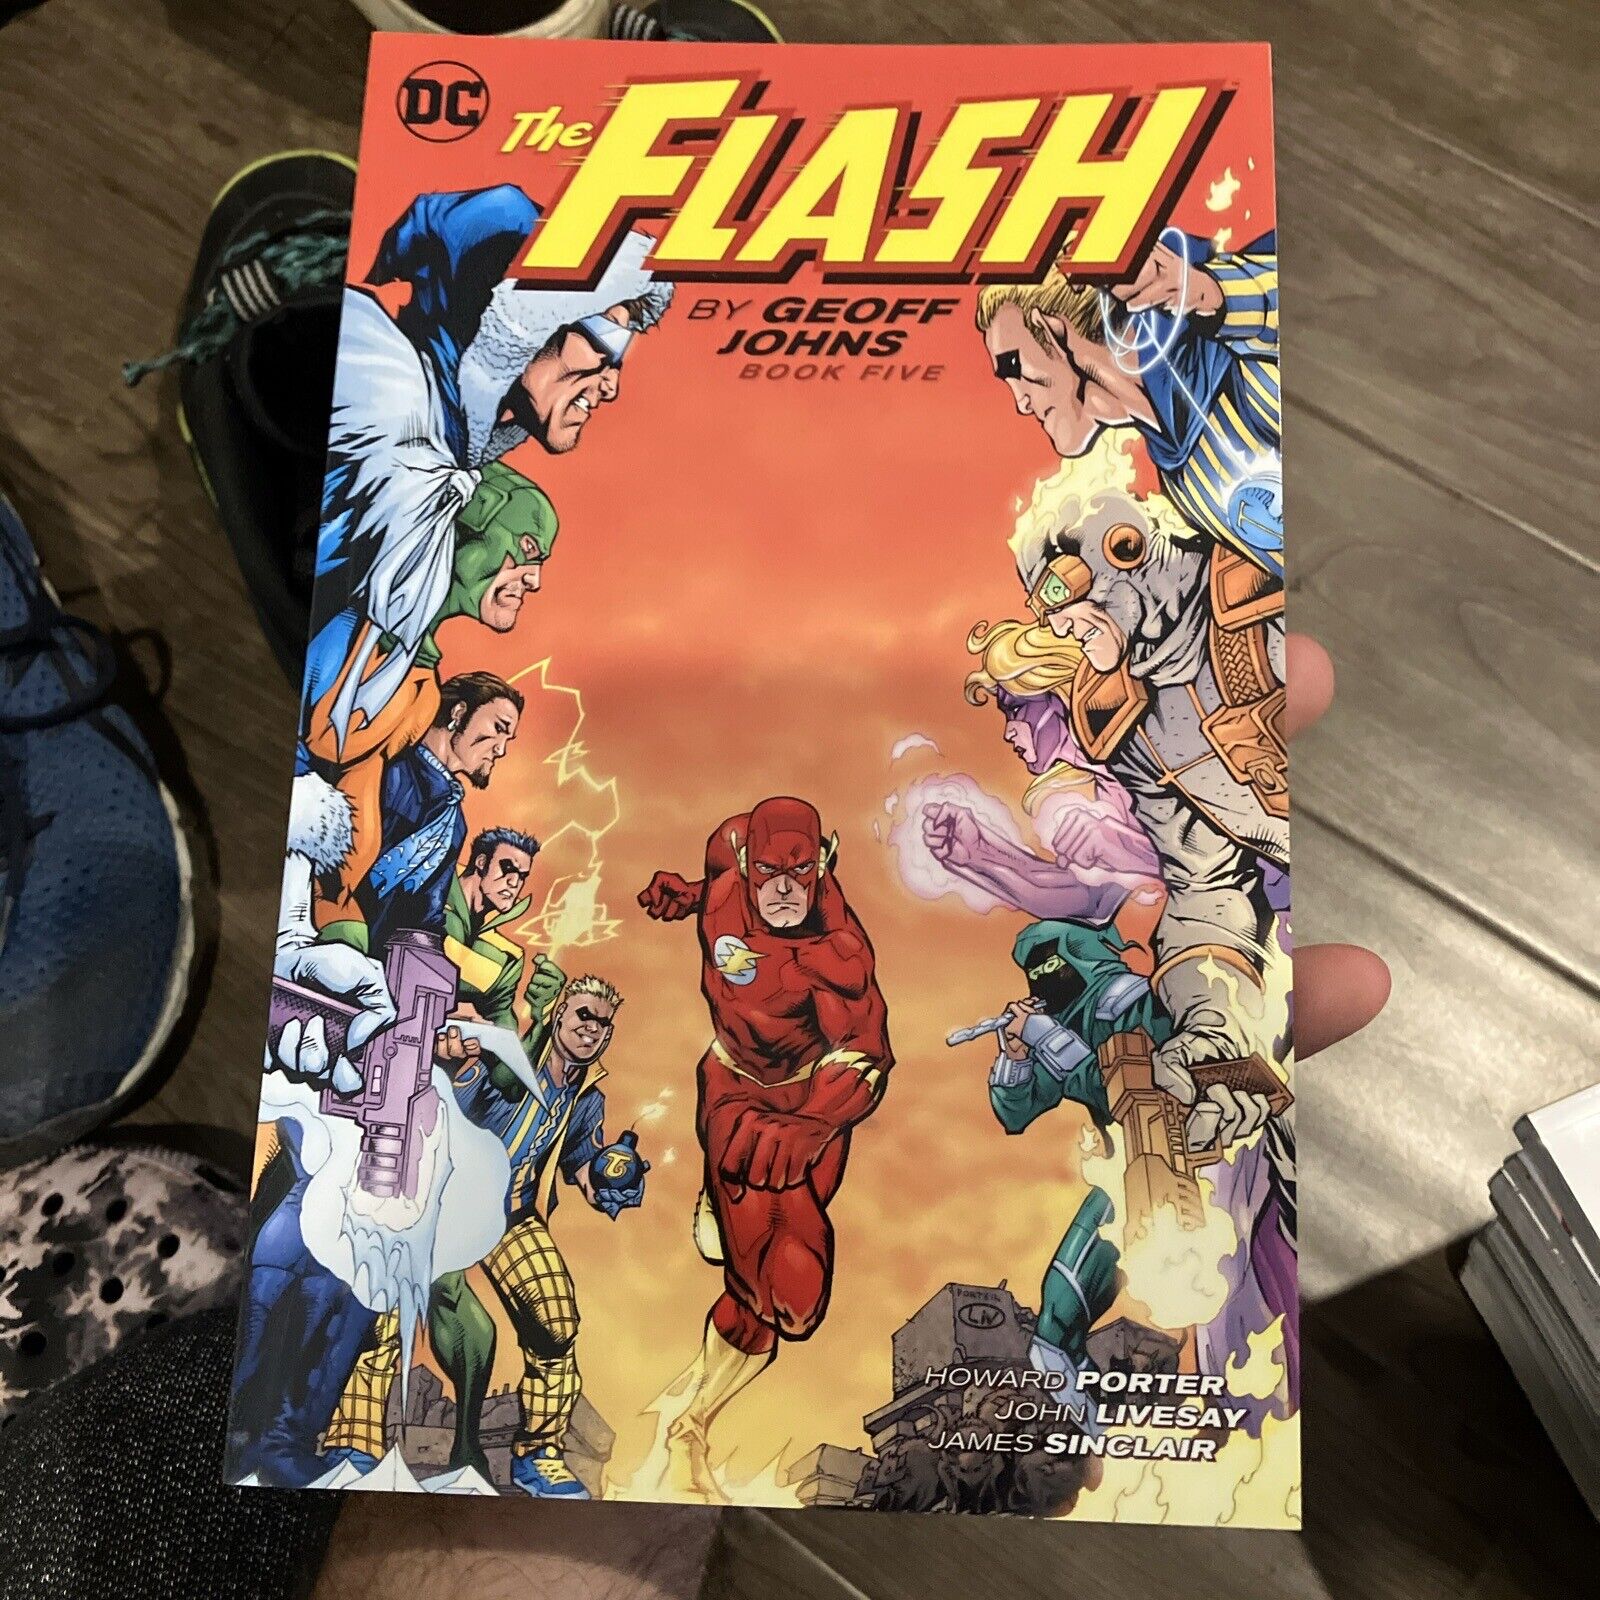 The Flash by Geoff Johns Volume #5 TPB (DC Comics September 2018) New